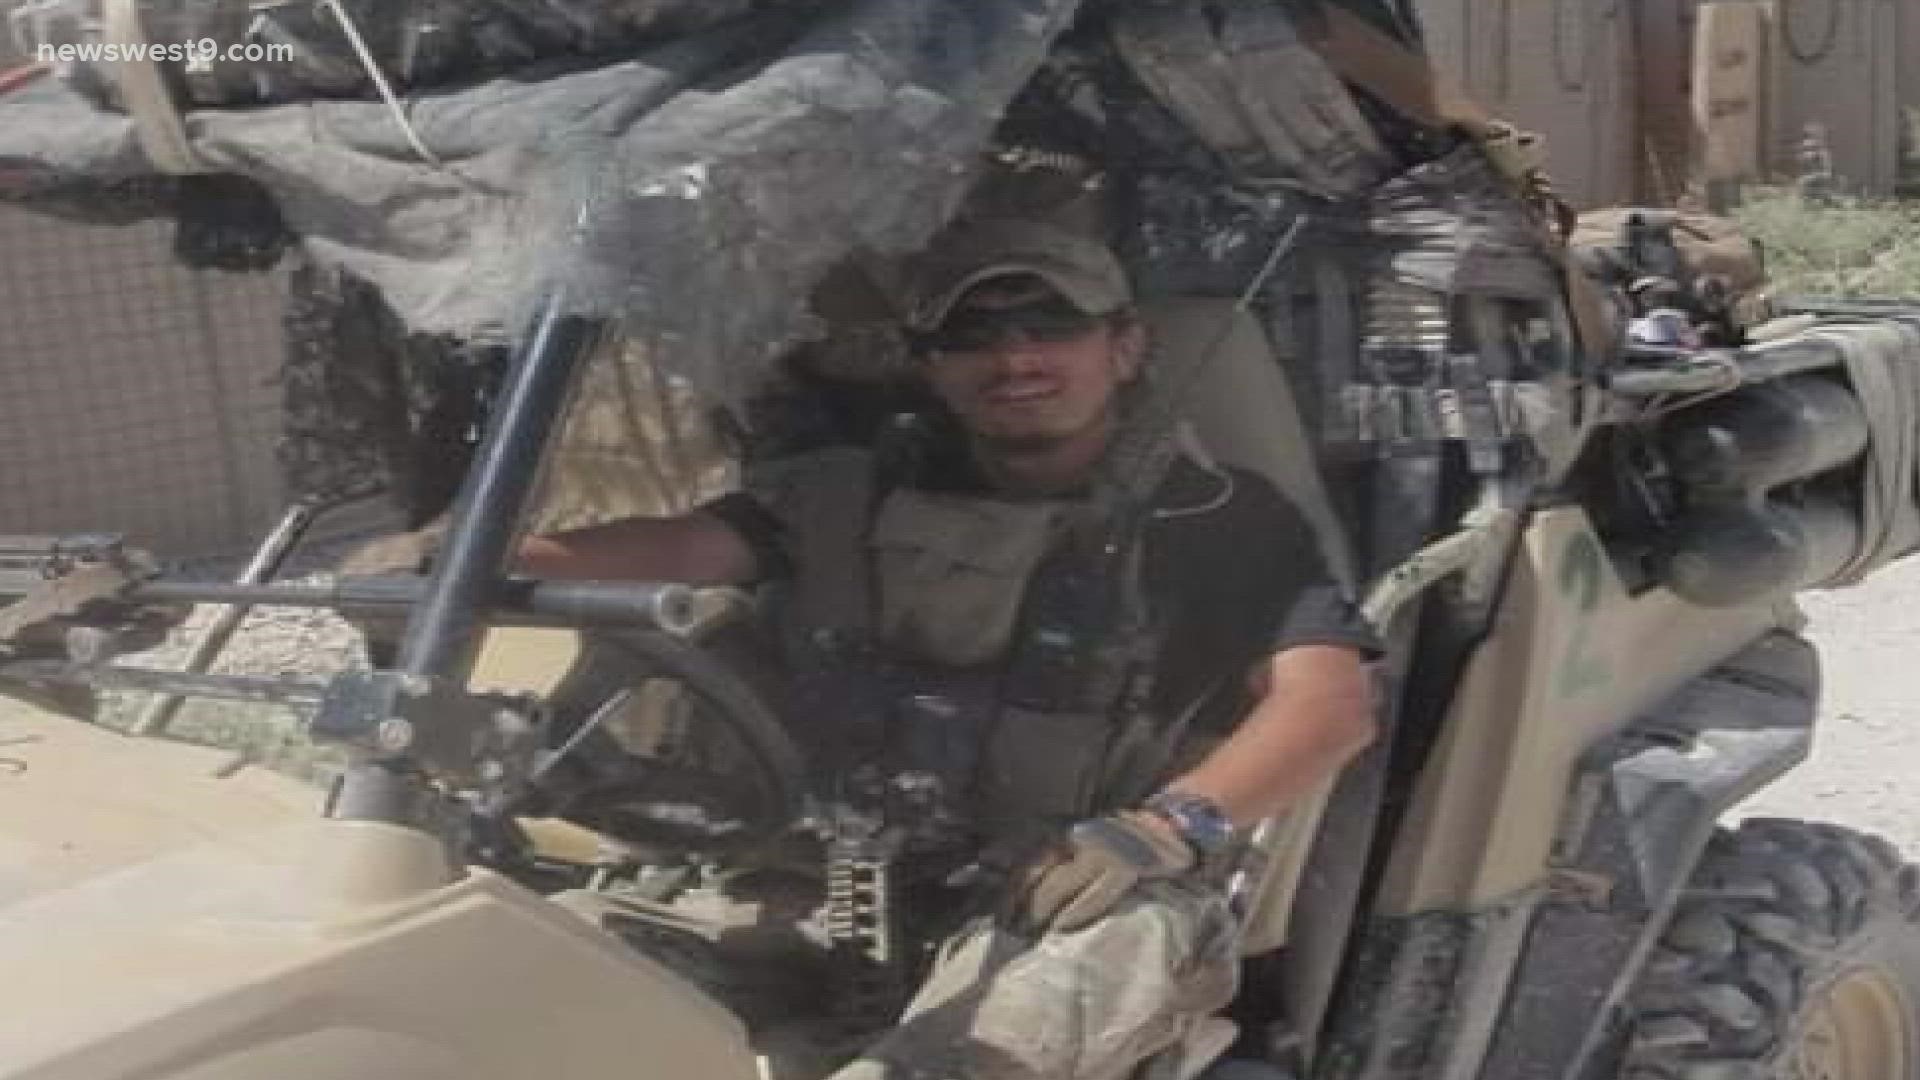 West Texan and retired Green Beret Sgt. Joseph Torres and fellow soldiers worked to get Mikey out of Afghanistan safely.